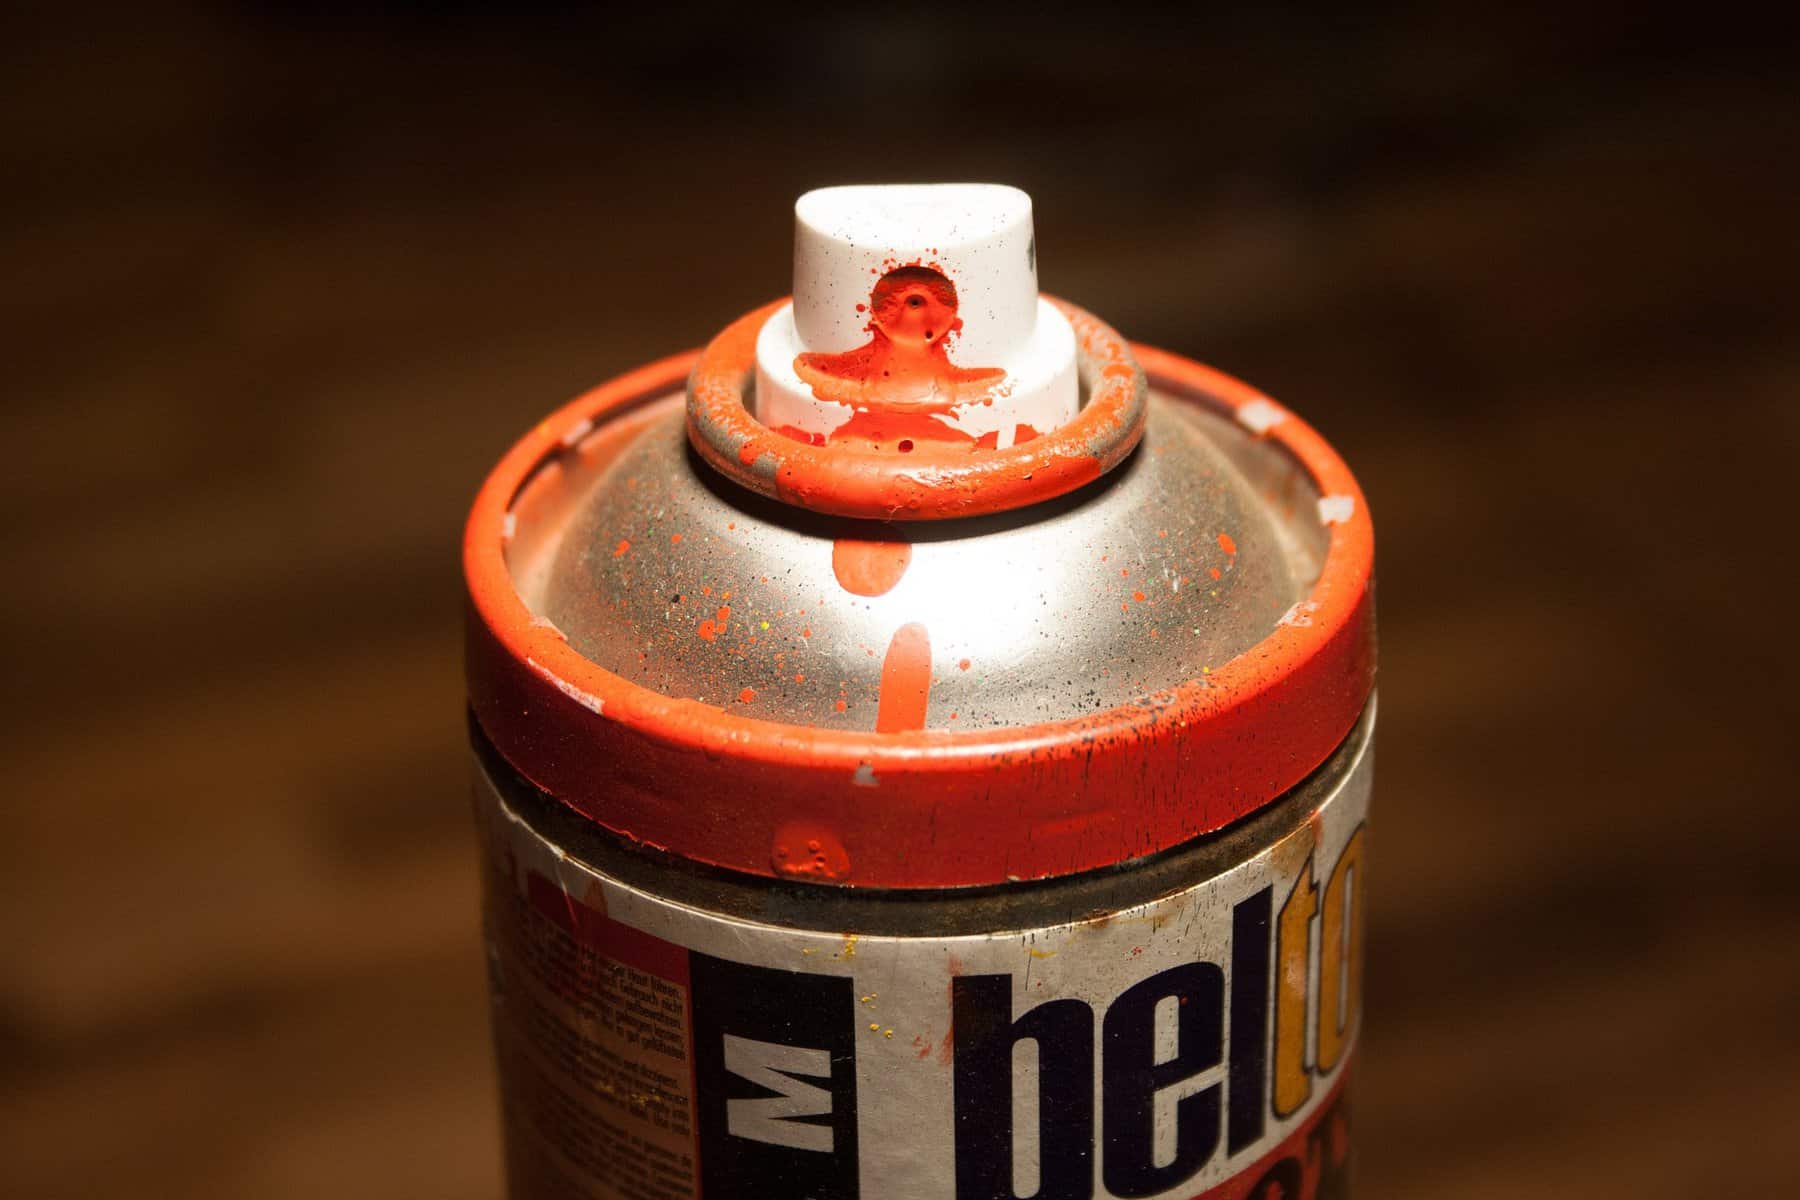 The top of a used spray-paint can is shown covered in it's orange paint.